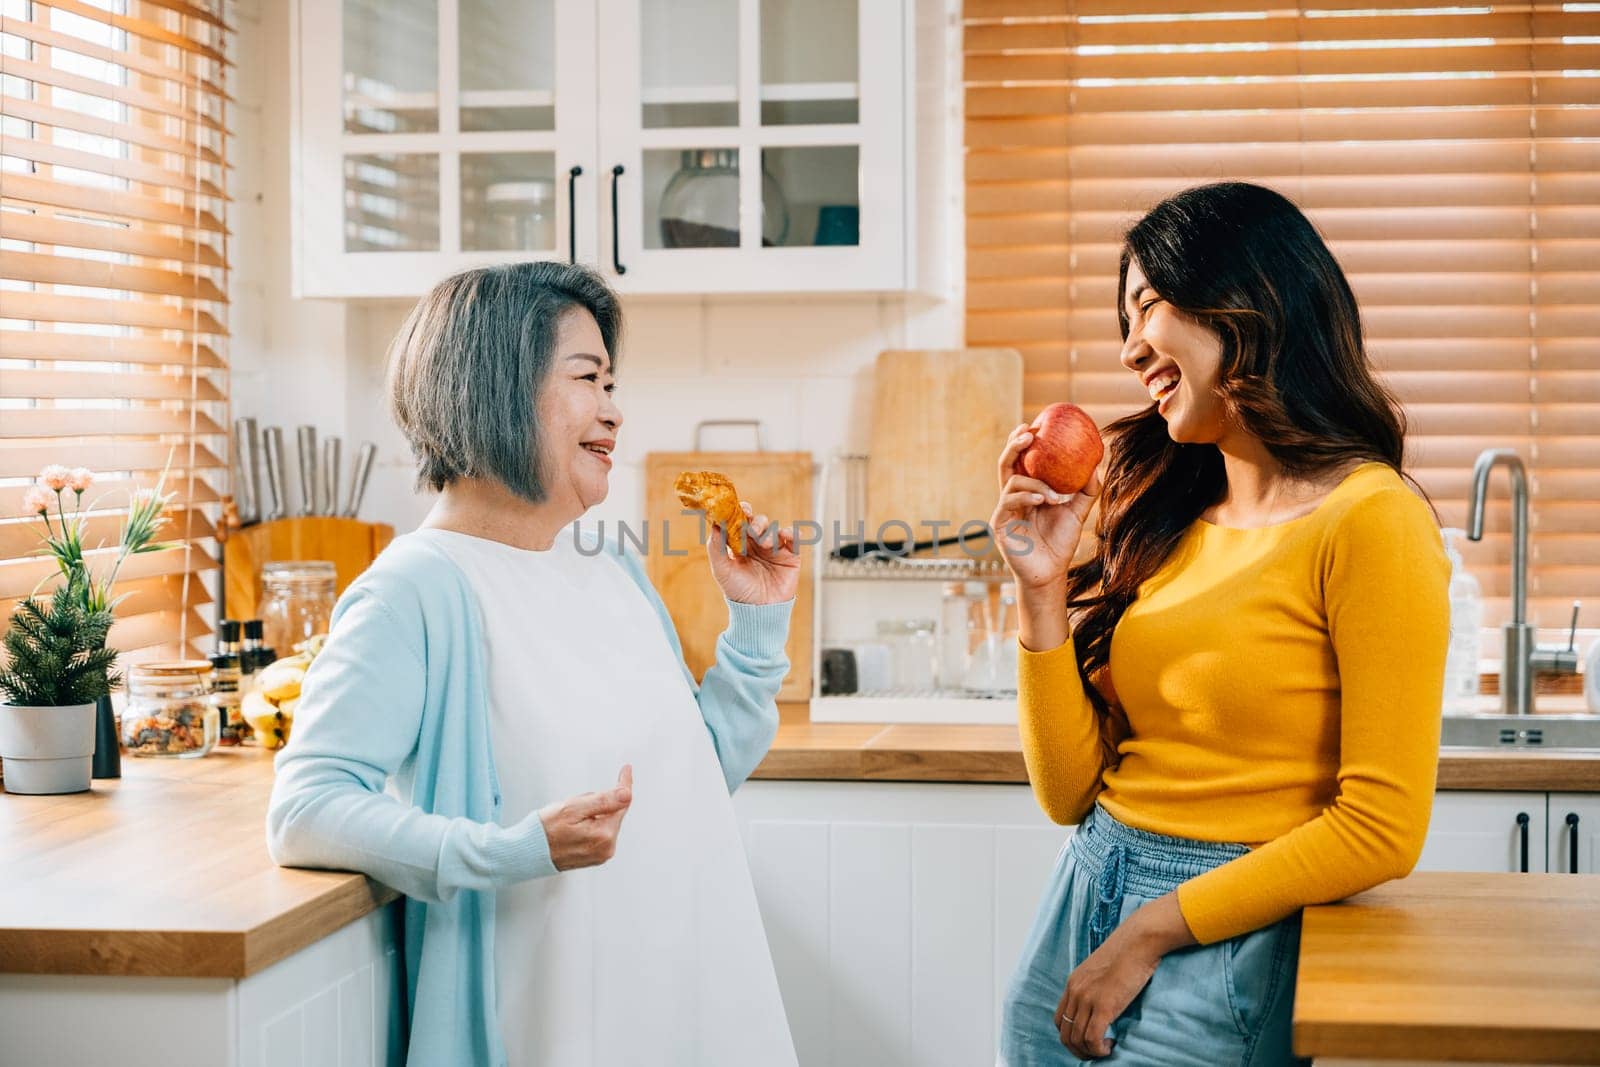 An elderly mother and her adult daughter, a young woman in an apron, bond over food in the kitchen. Their cheerful smiles highlight the happiness and fun of family togetherness at home. by Sorapop